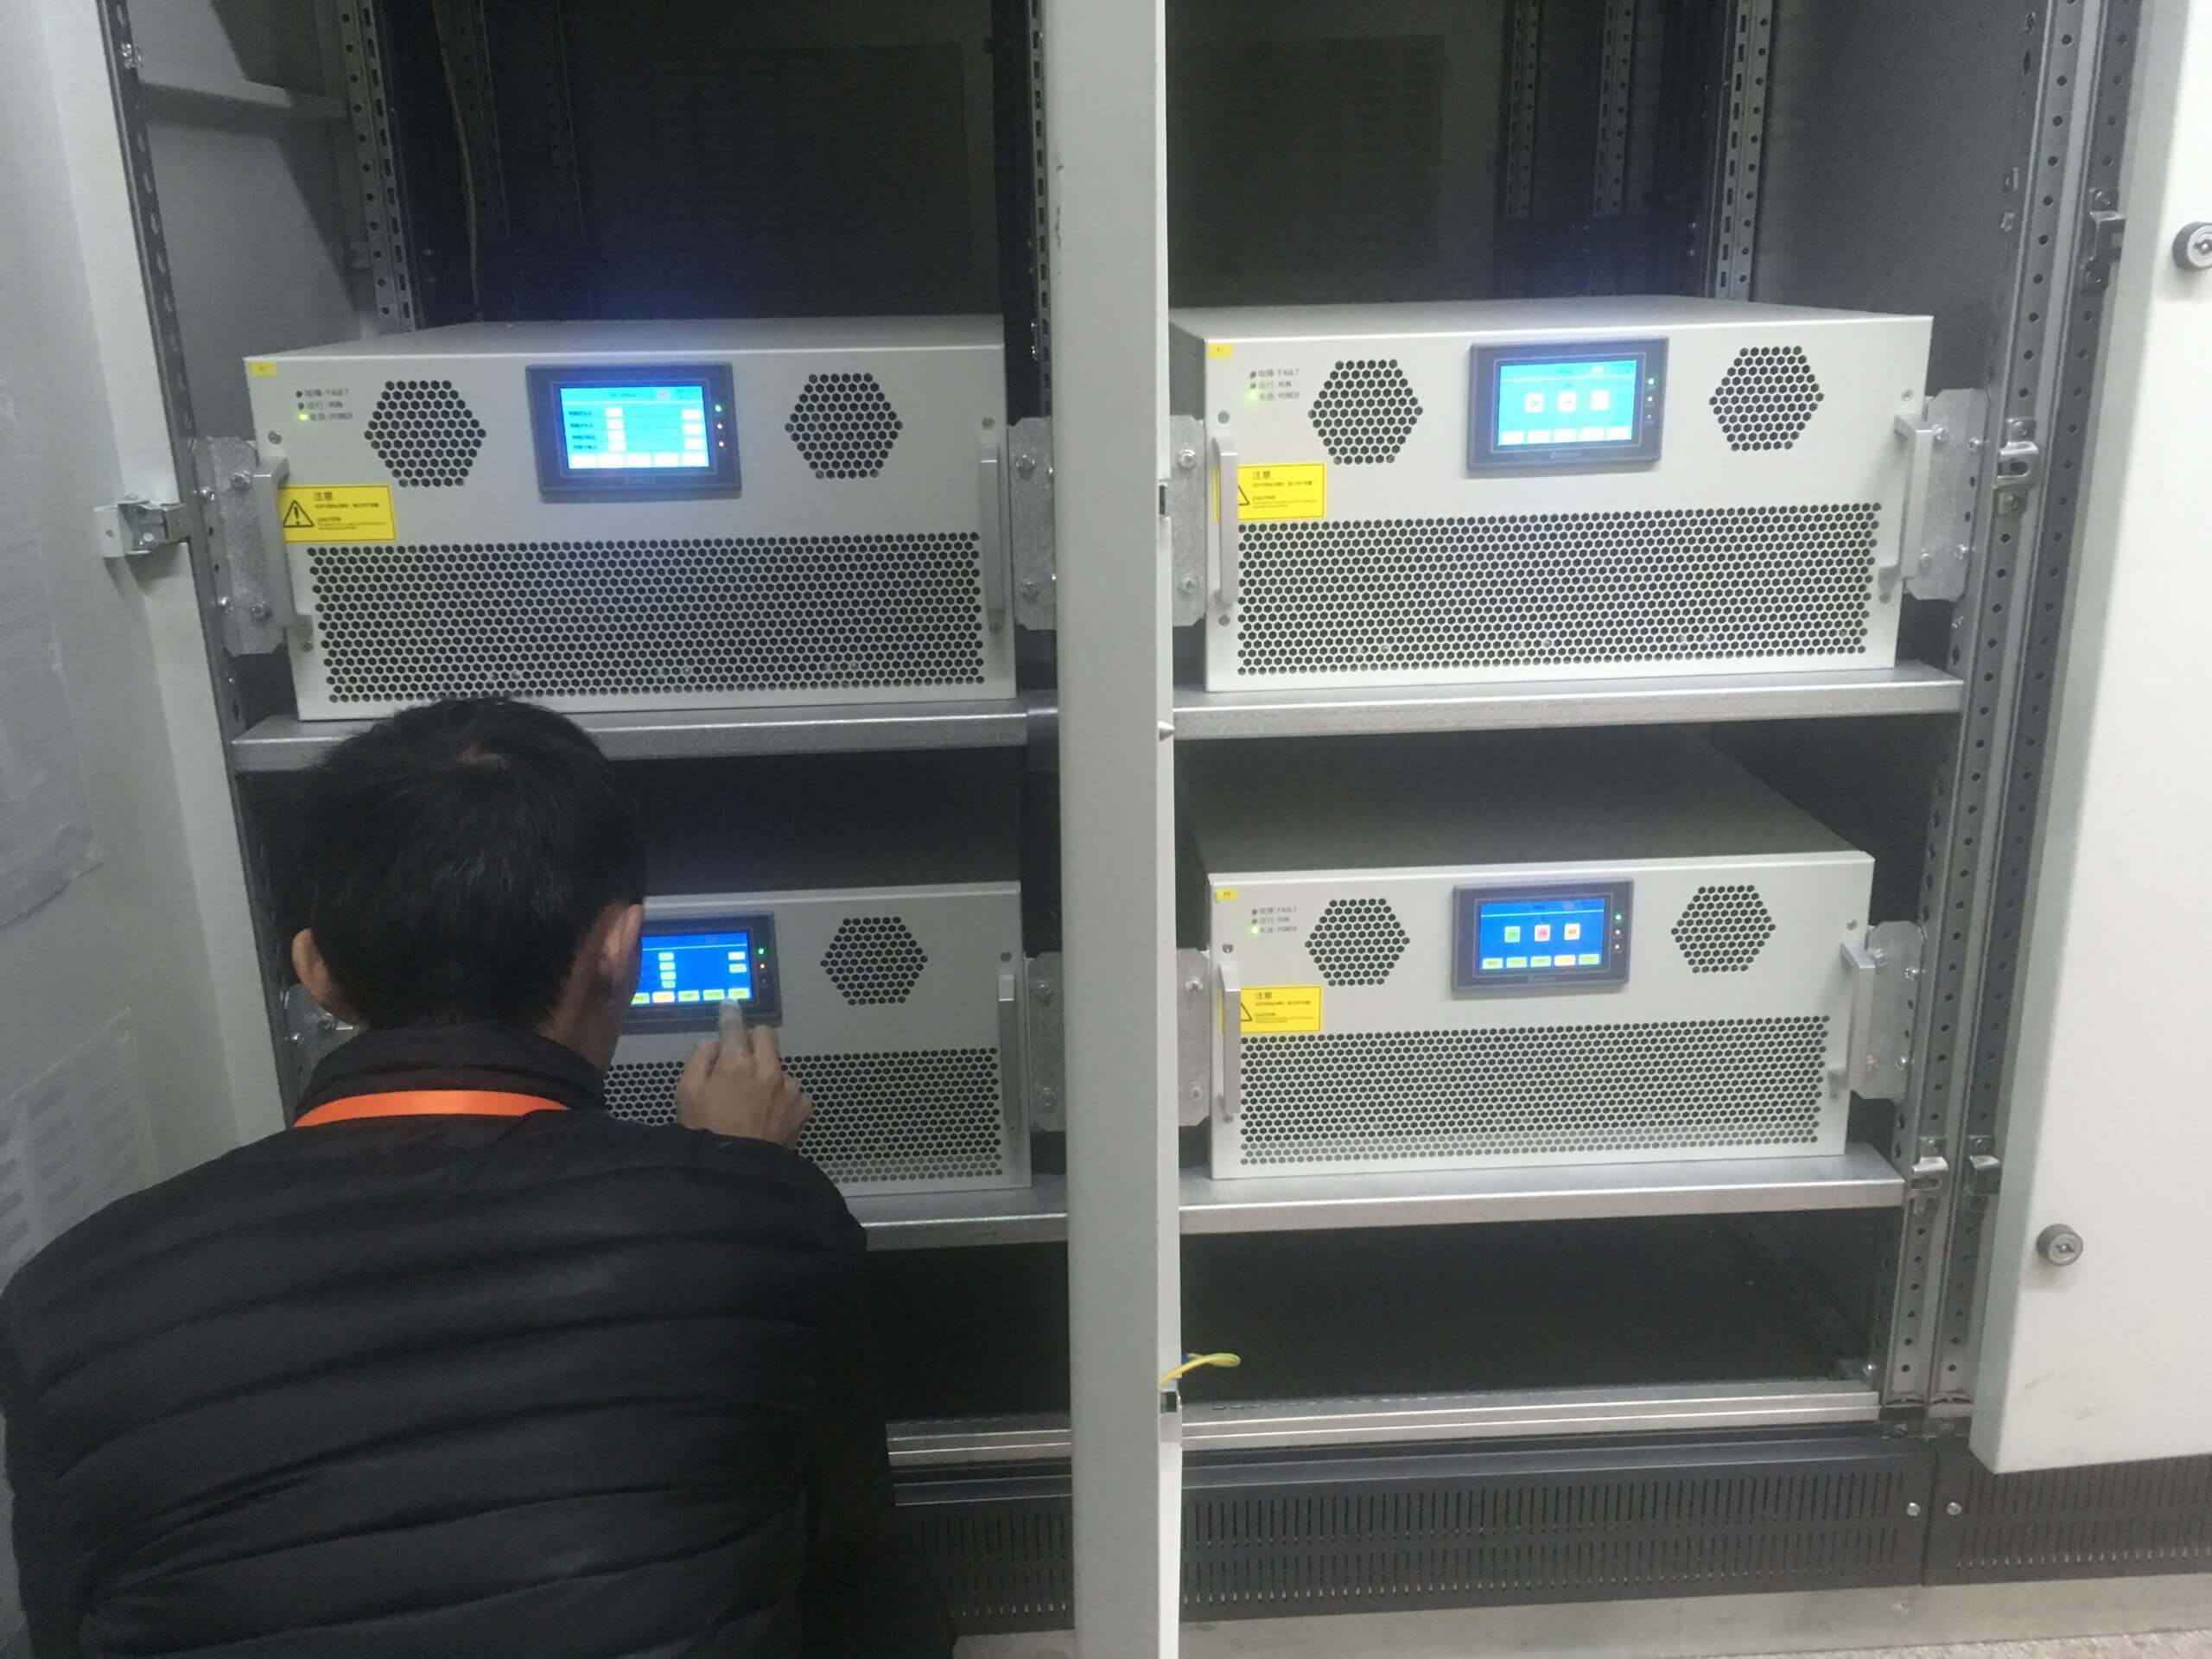 Enjoypowers power quality applications active harmonic filter used in Guanlan data center (1)